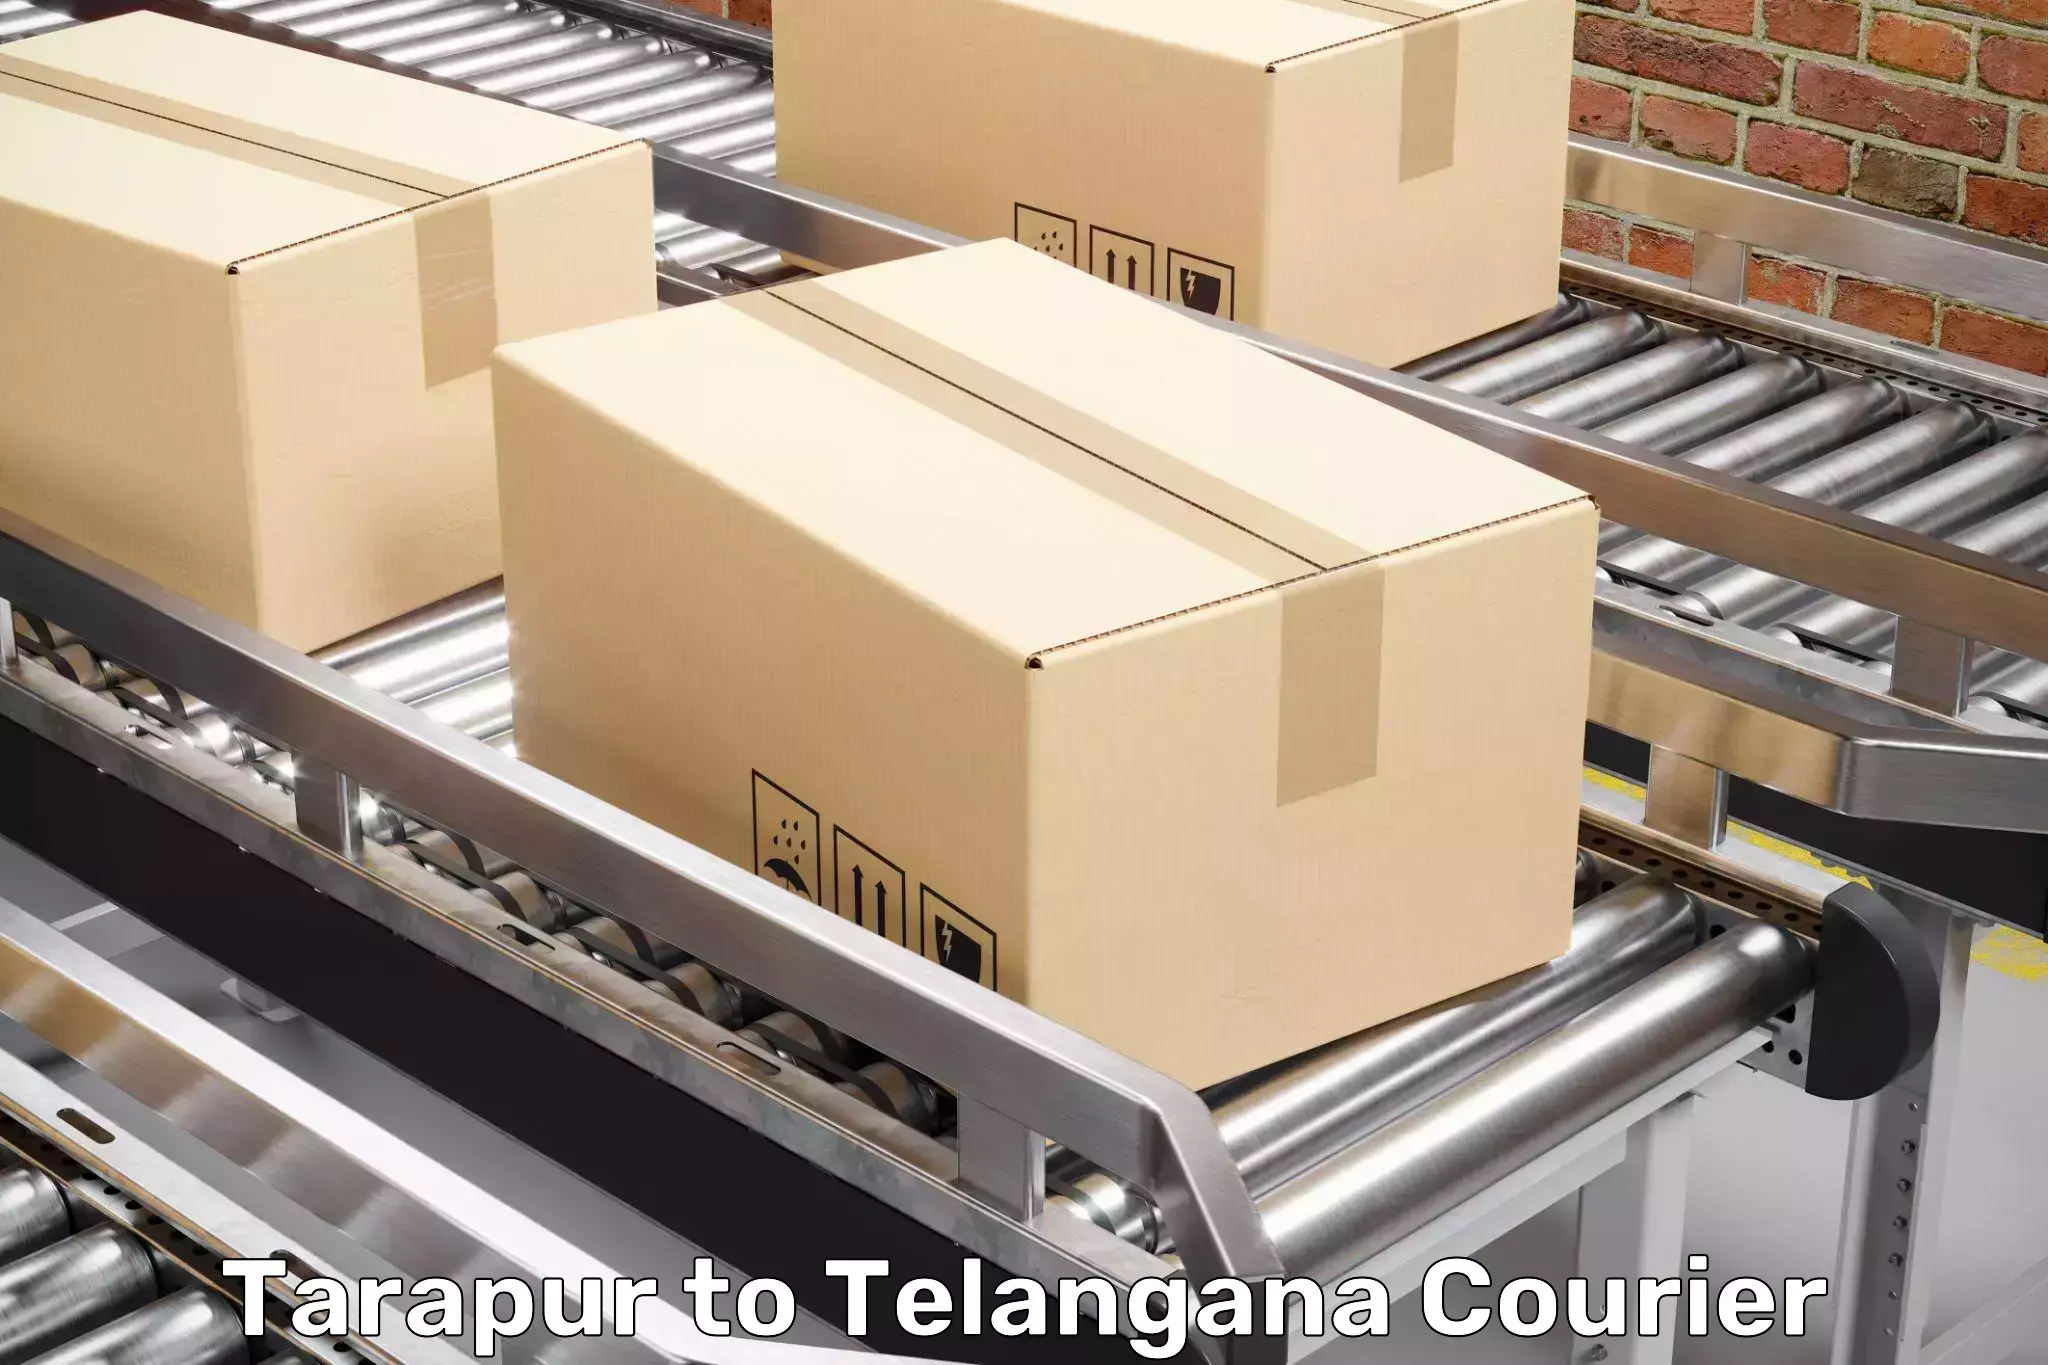 Quality relocation assistance Tarapur to Gollapalli